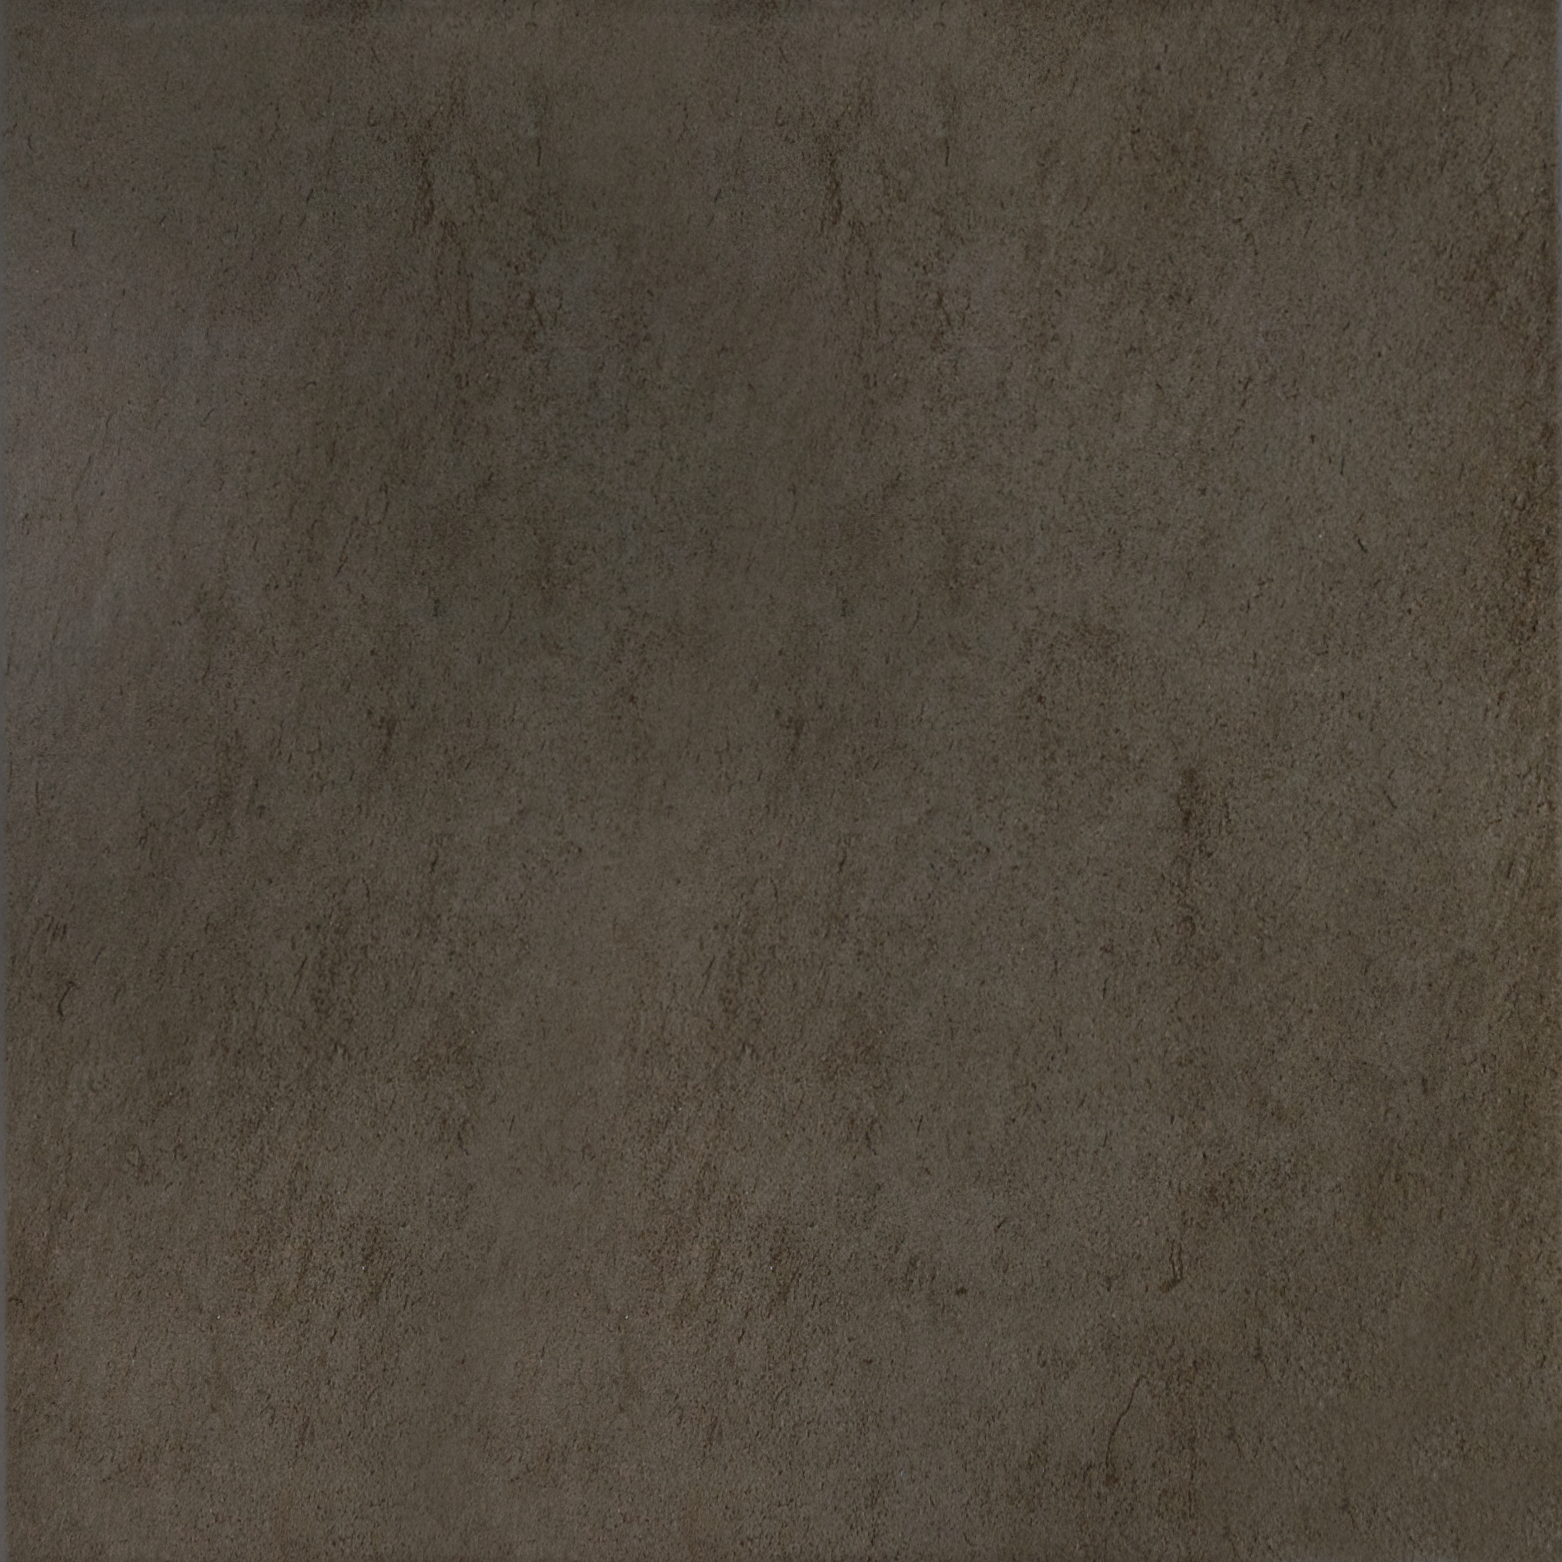 brown pattern glazed porcelain field tile from cinq anatolia collection distributed by surface group international matte finish pressed edge 13x13 square shape